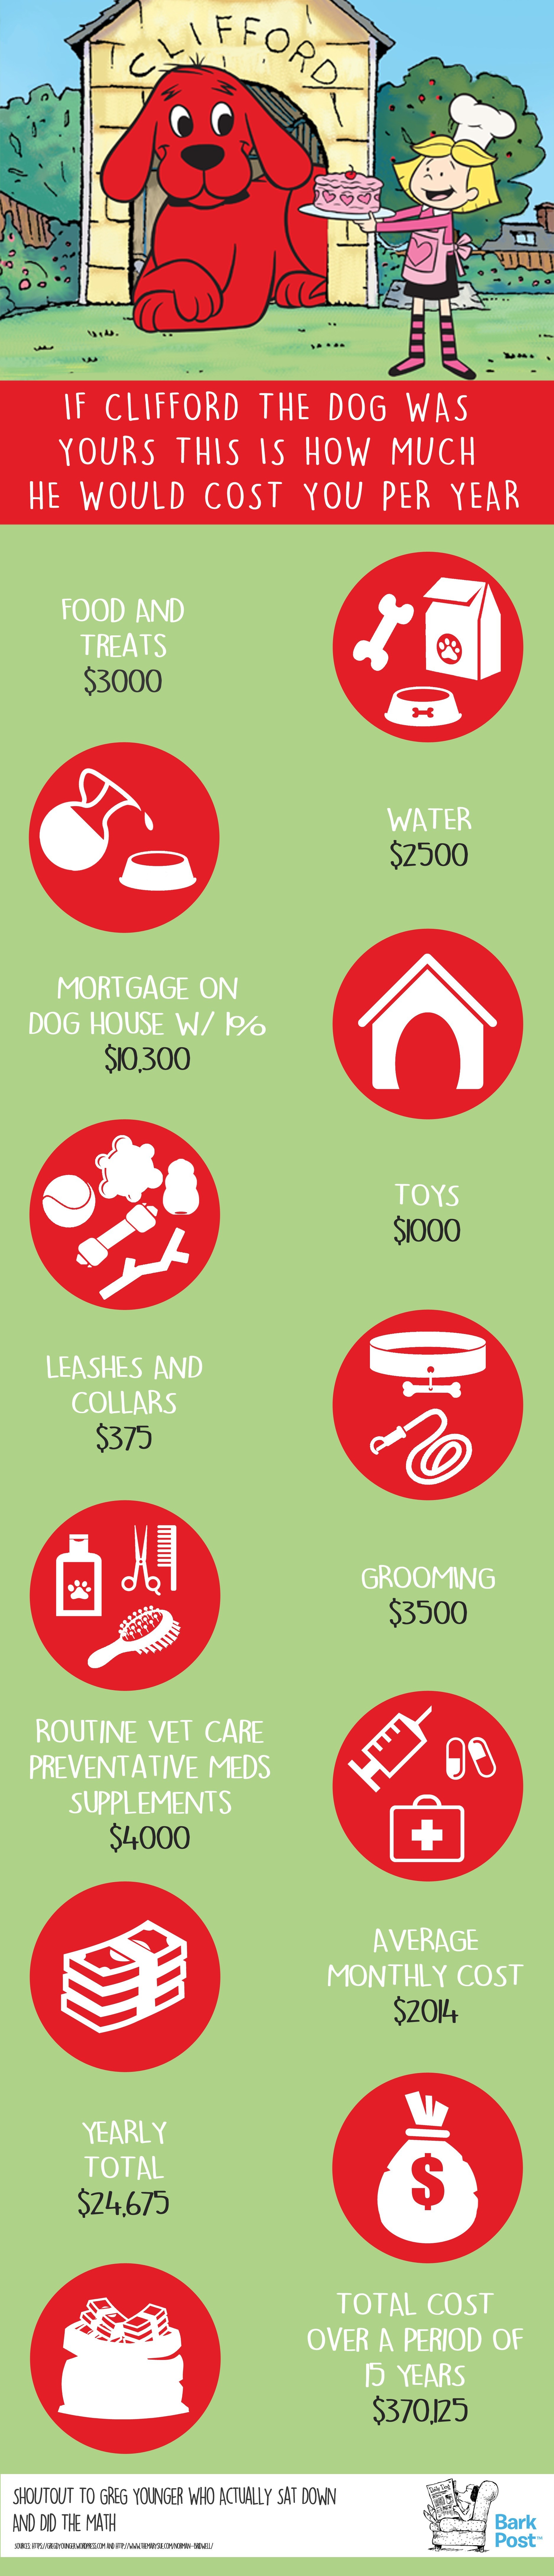 CLifford Infographic cost